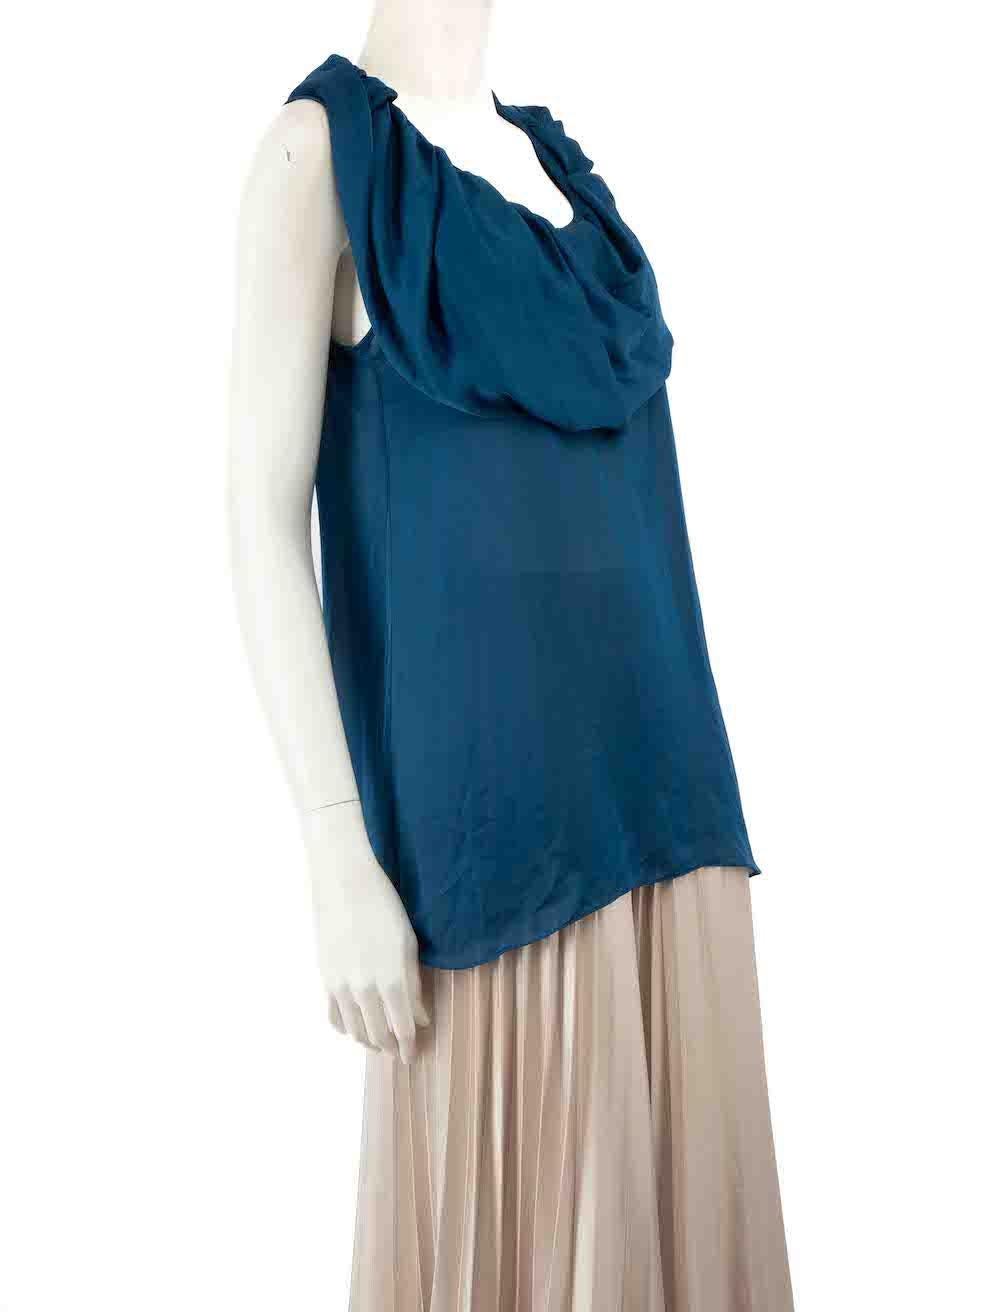 CONDITION is Very good. Minimal wear to top is evident. Minimal wear to the ruffled neckline with plucks to the weave on this used Givenchy designer resale item.
 
 
 
 Details
 
 
 Blue
 
 Polyester
 
 Top
 
 Sleeveless
 
 Balloon detail on the